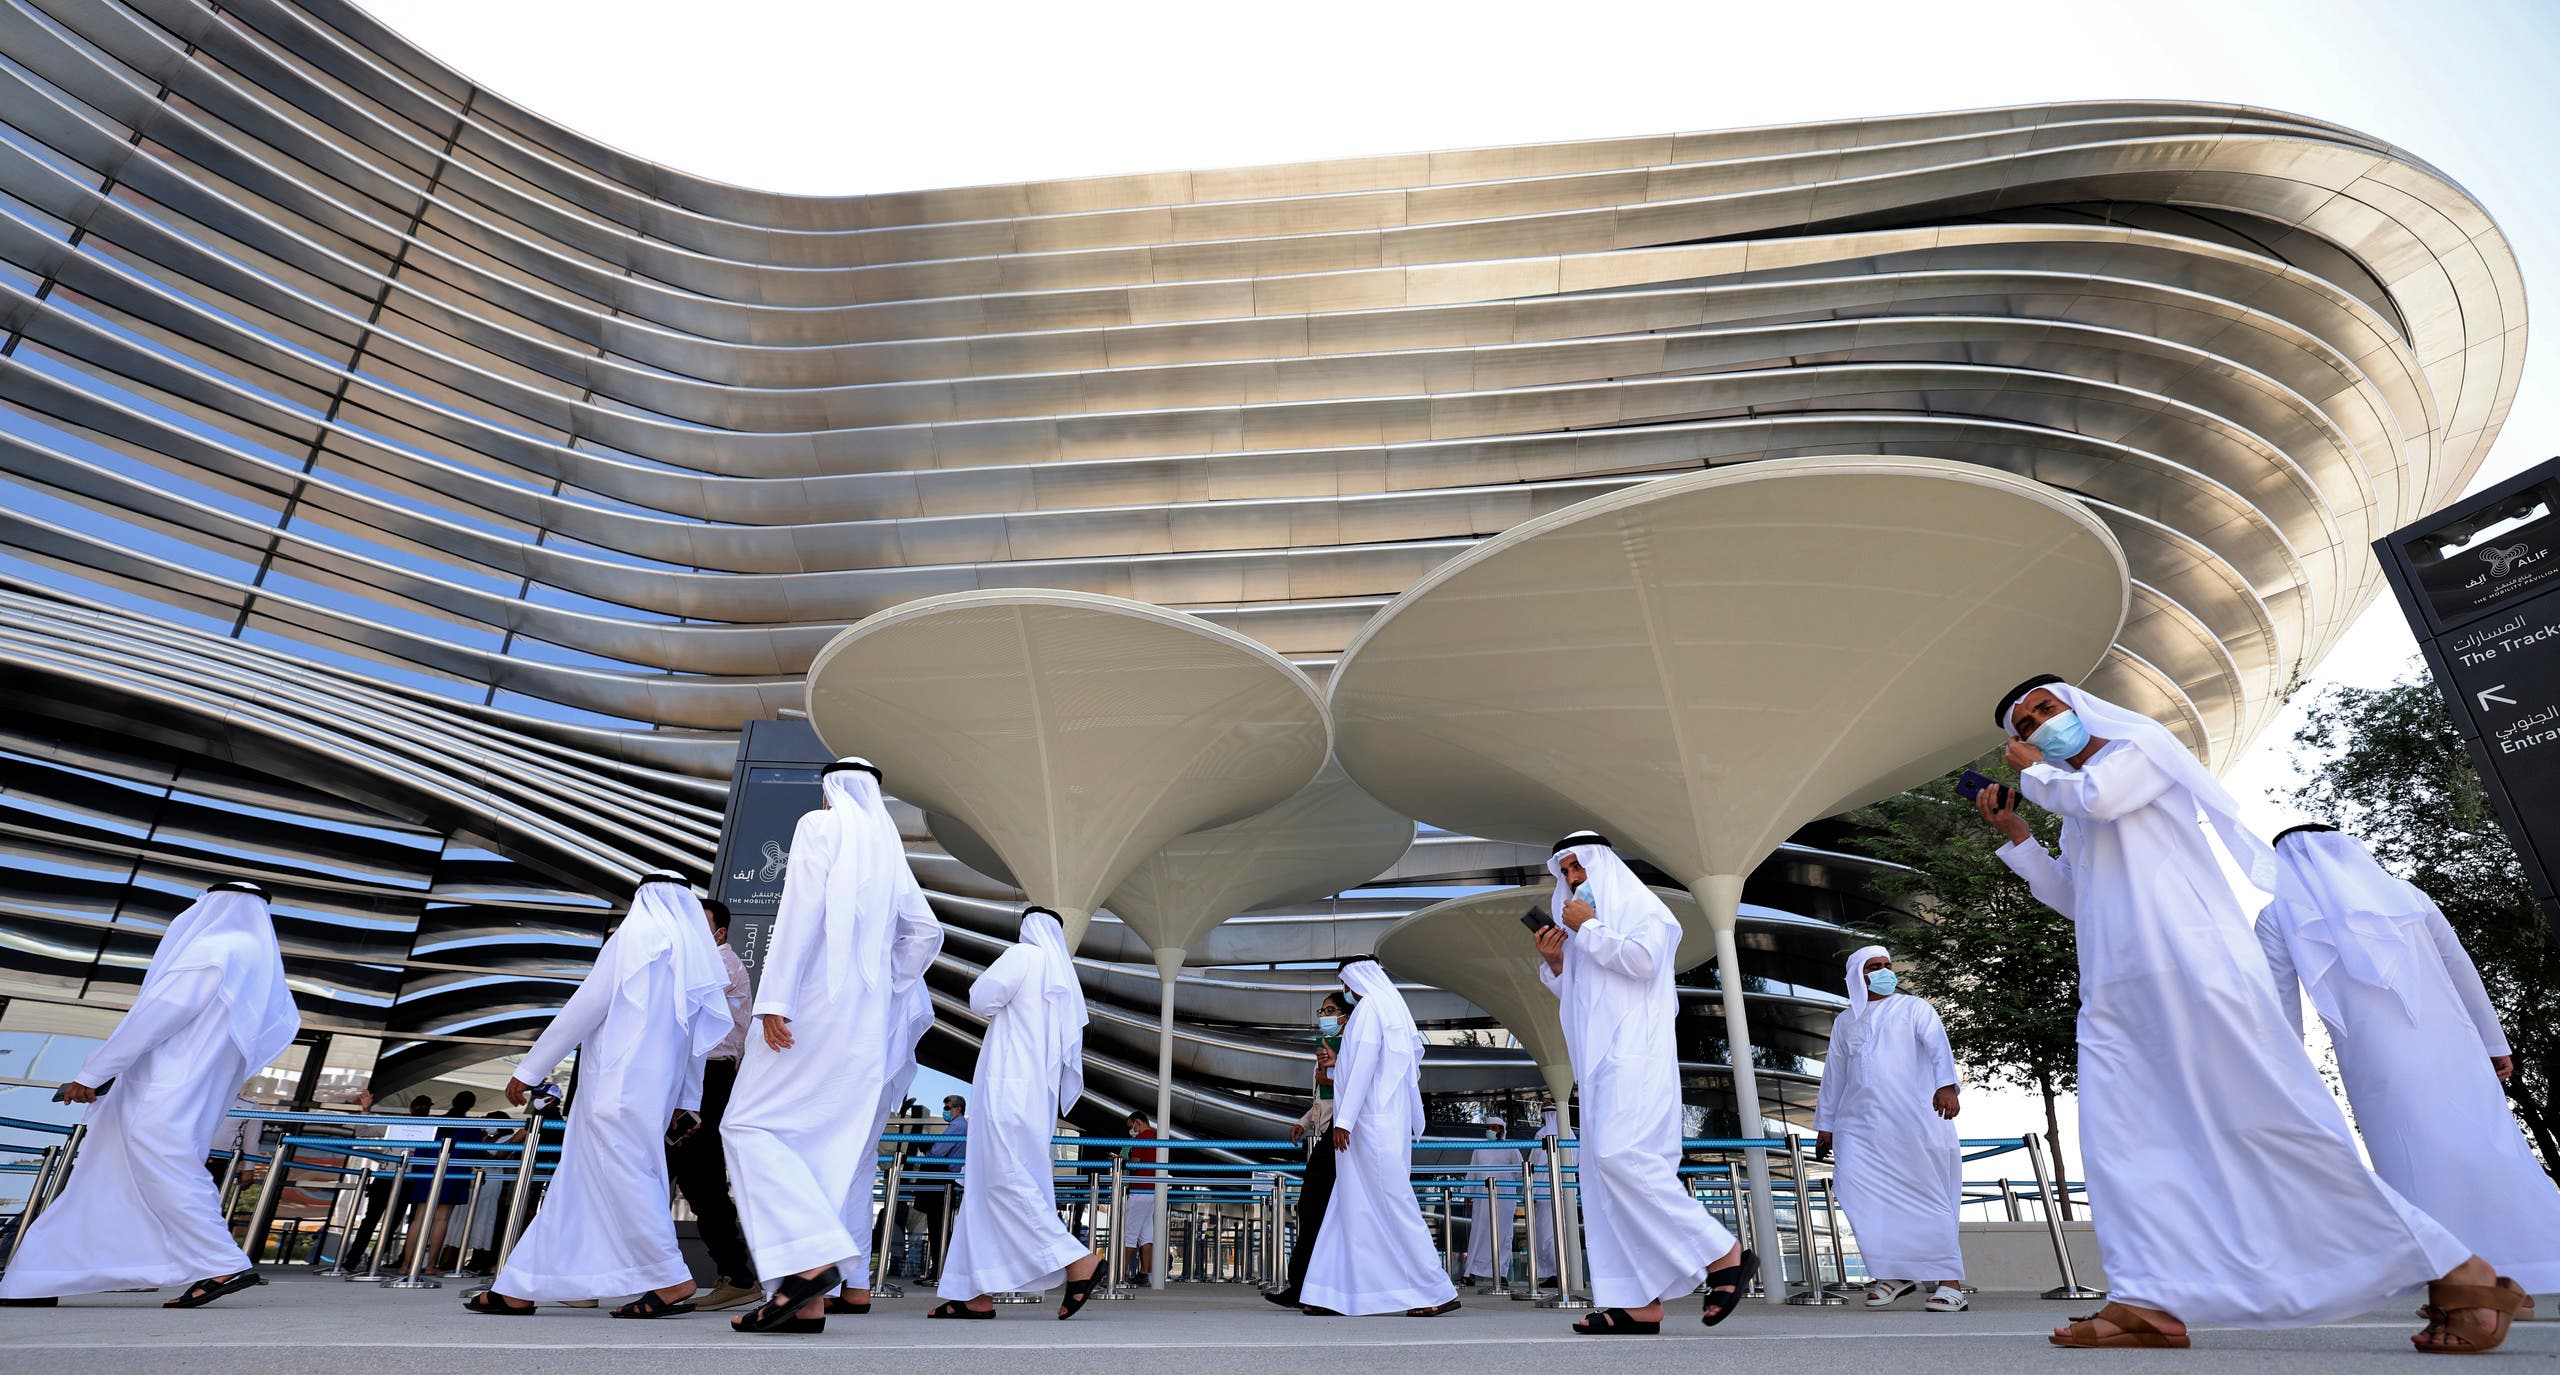 Visitors walk outside the Sustainability pavilion at the Expo 2020 in the Gulf Emirate of Dubai on October 6, 2021. (AFP)